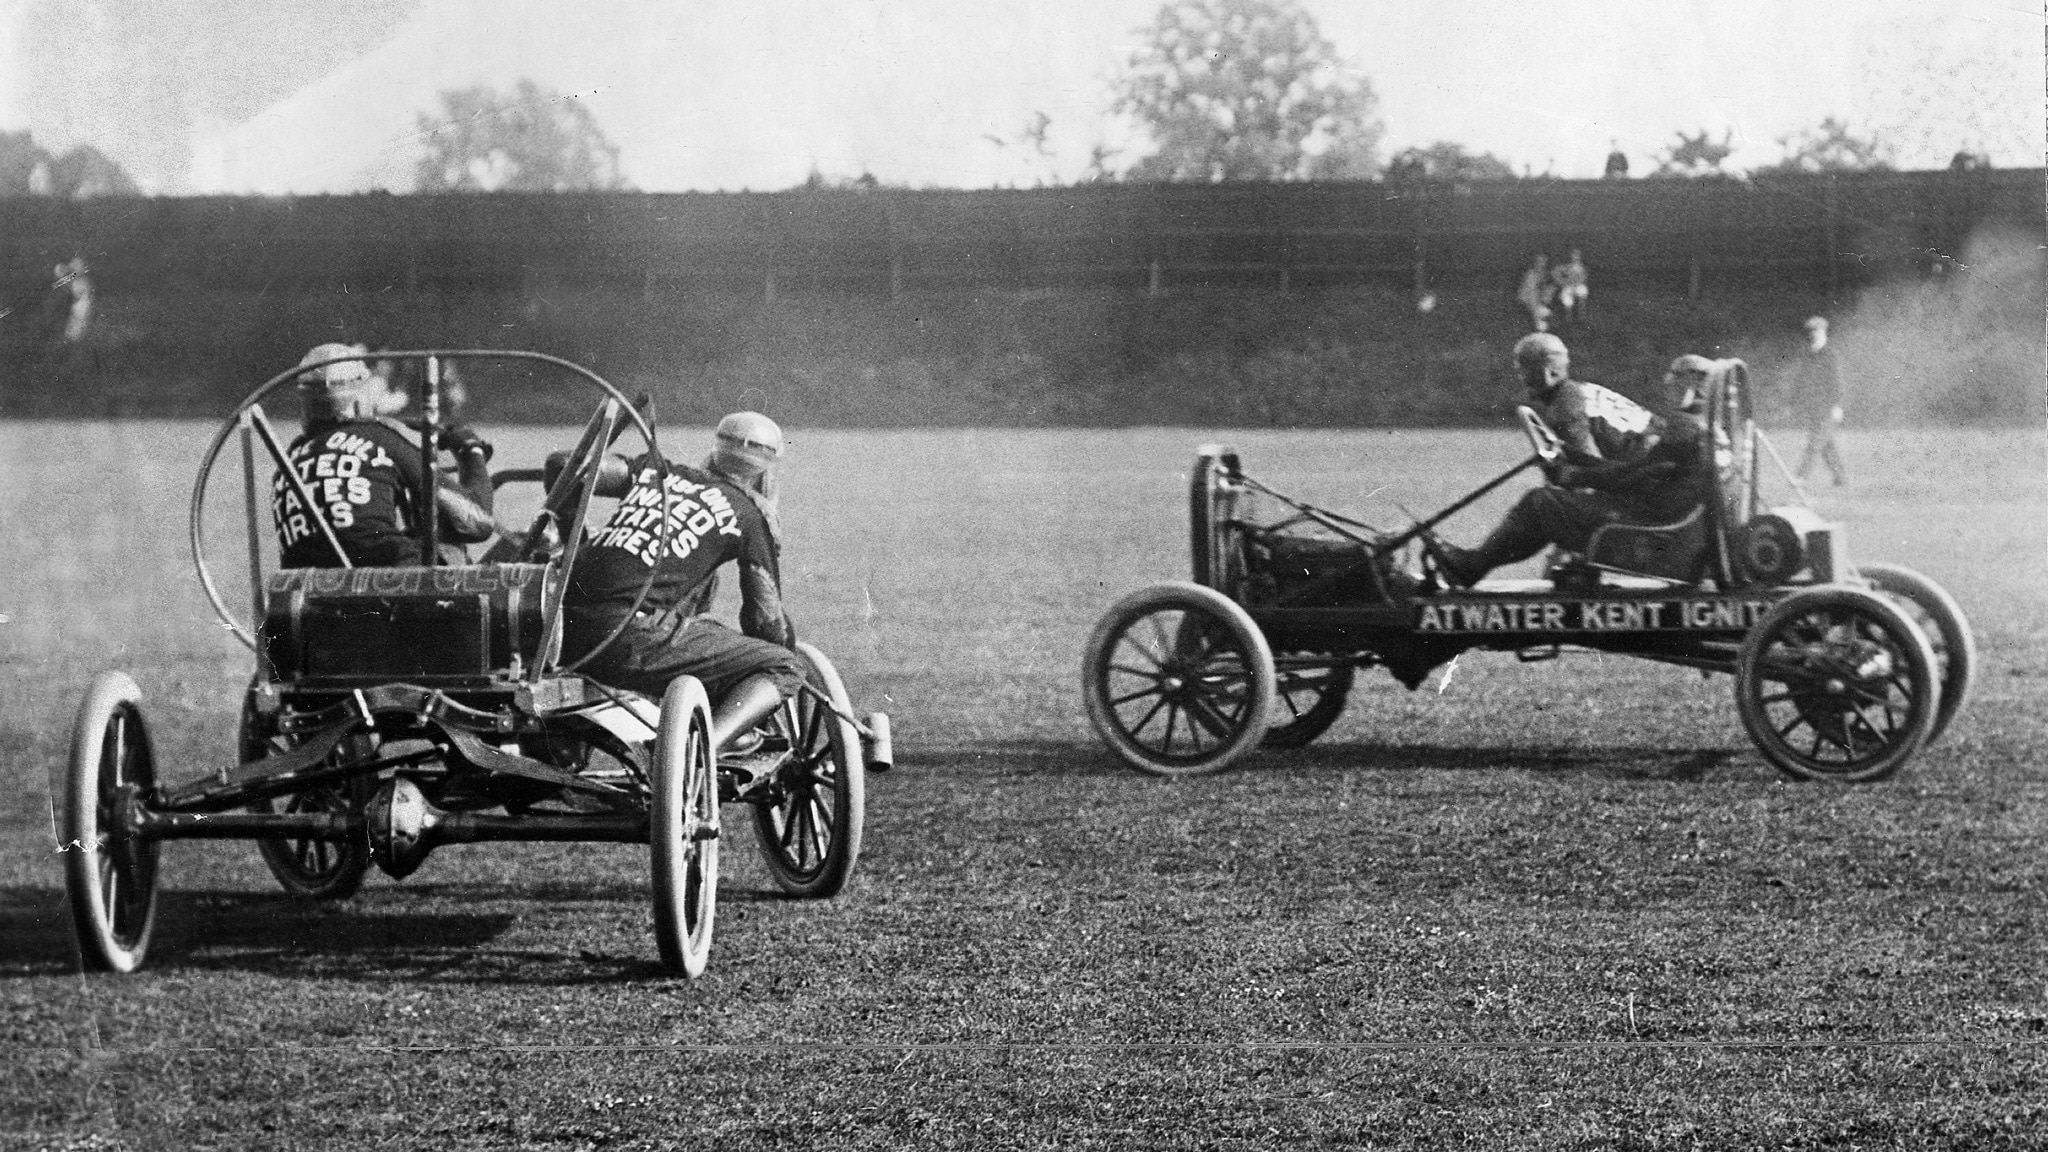 Auto poloists in cars during a match.